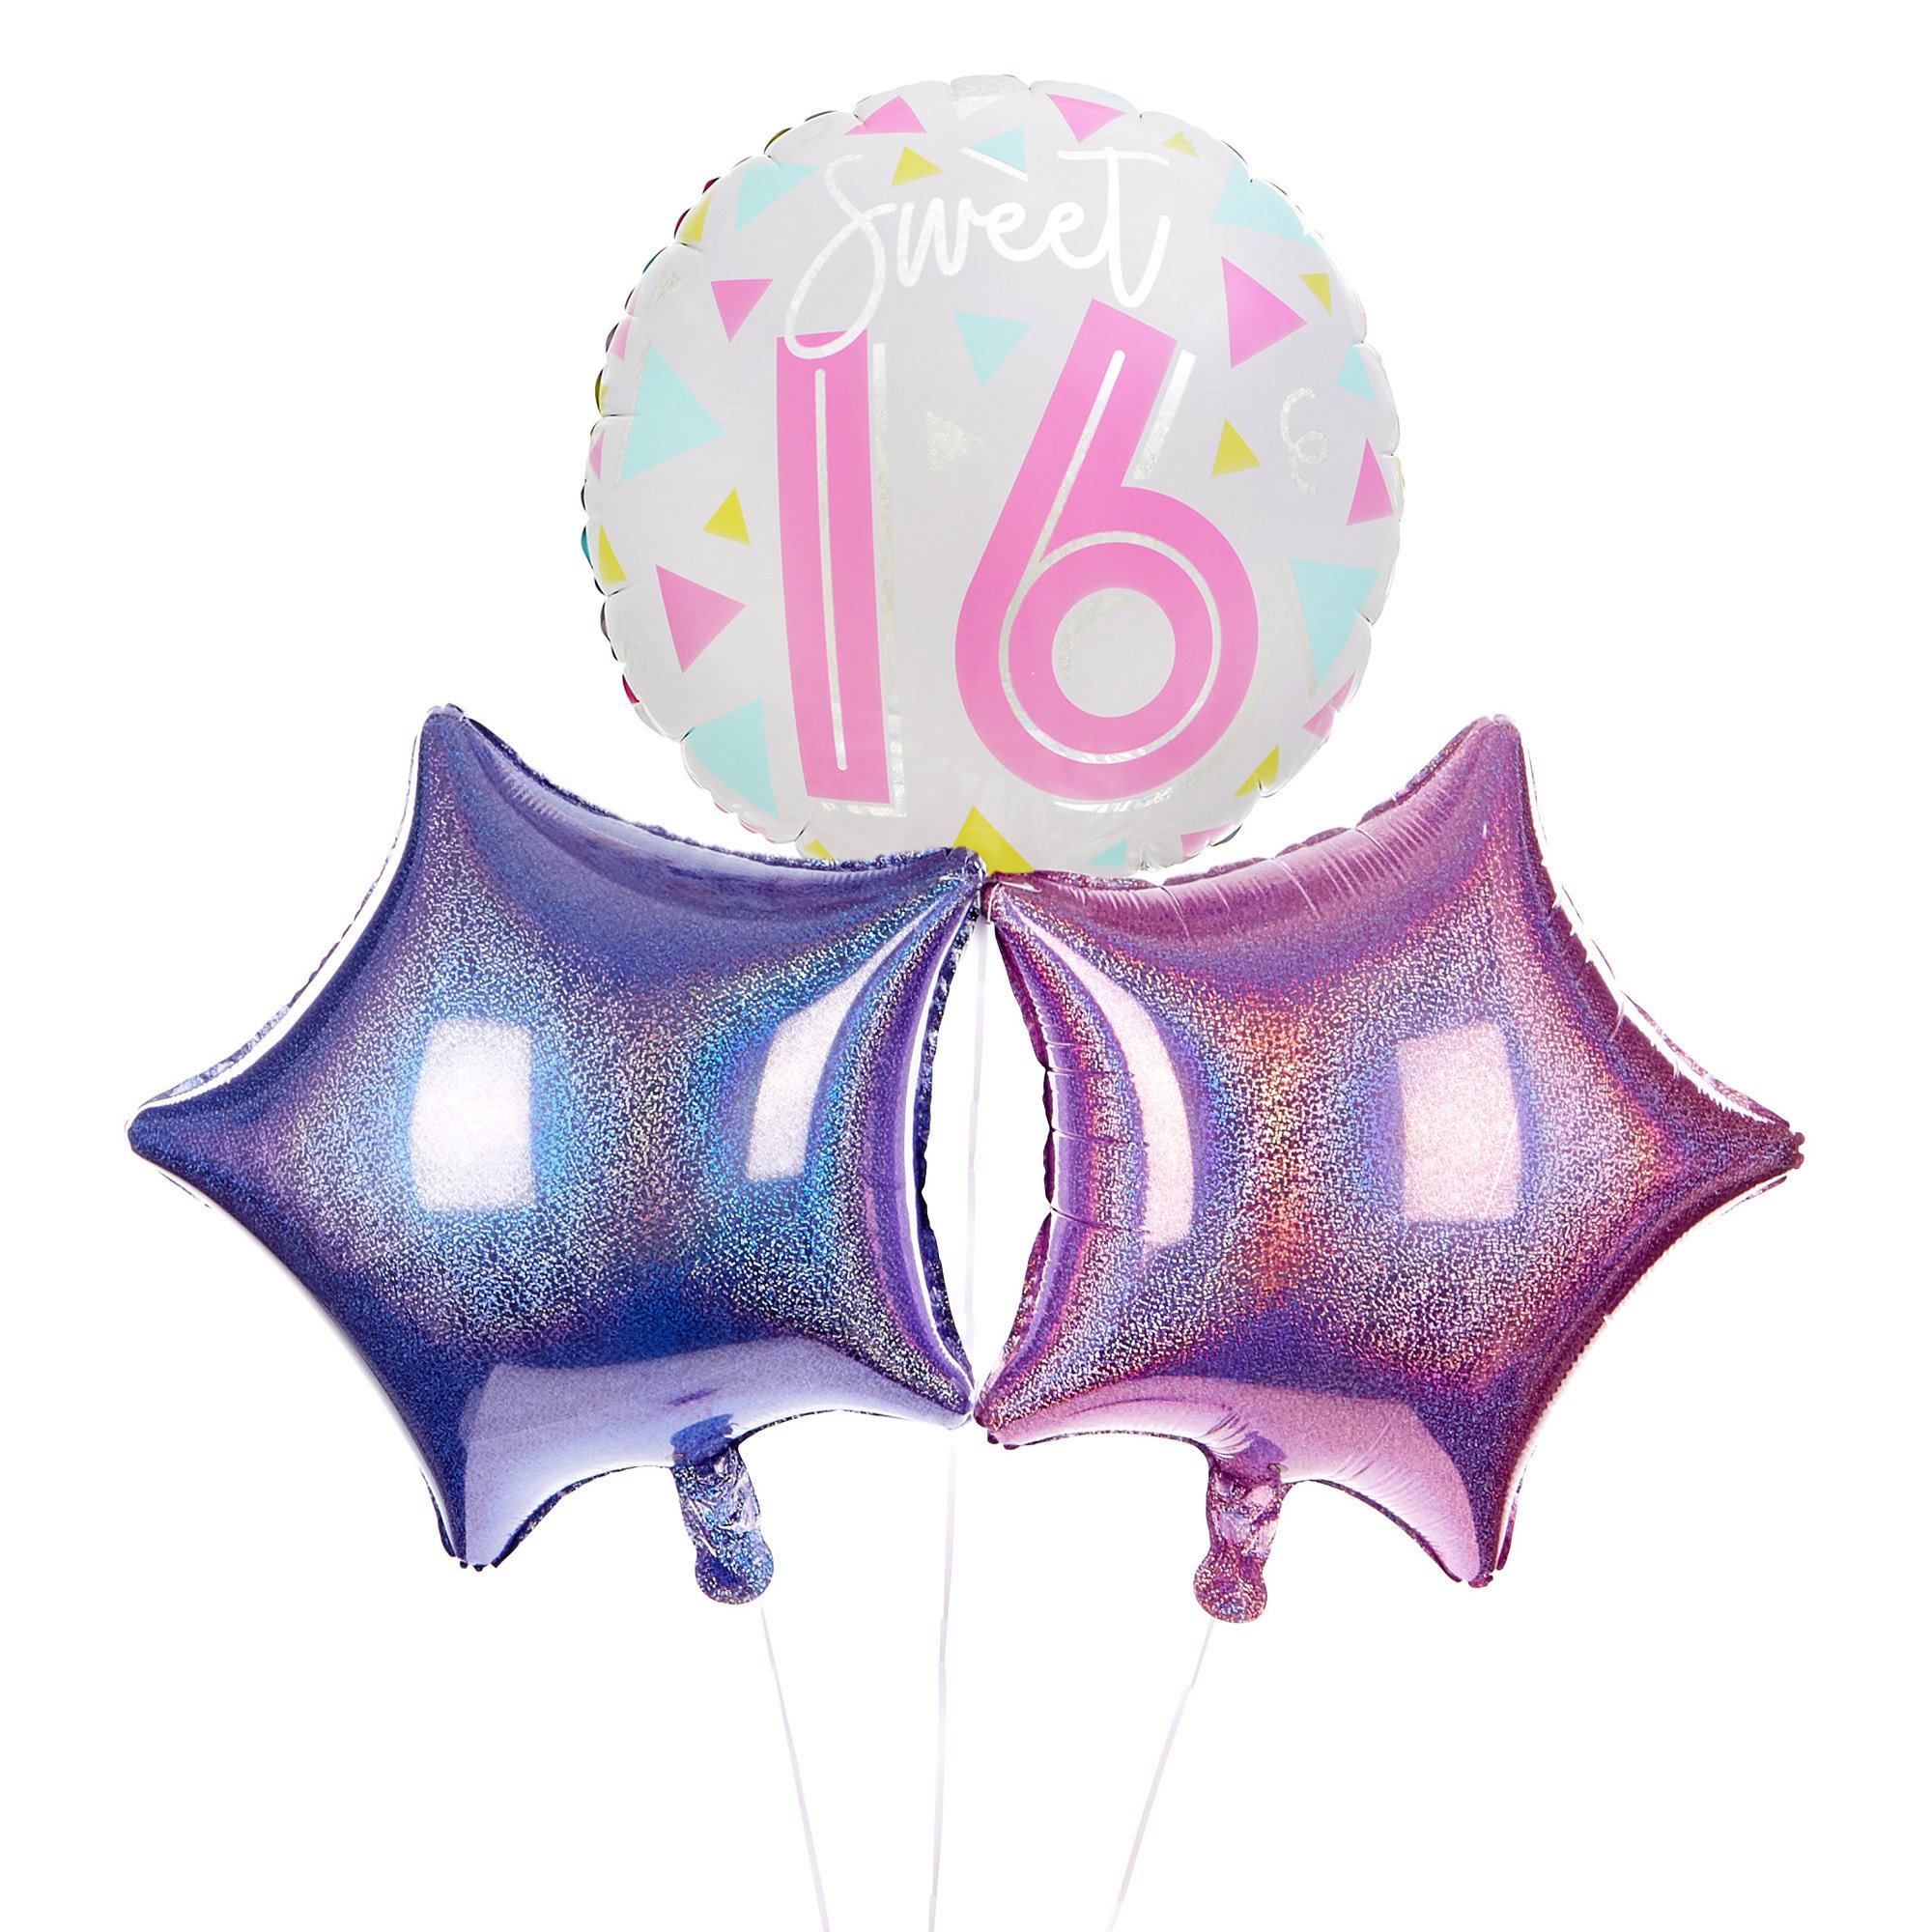 Sweet Sixteen 16th Birthday Balloon Bouquet - DELIVERED INFLATED!